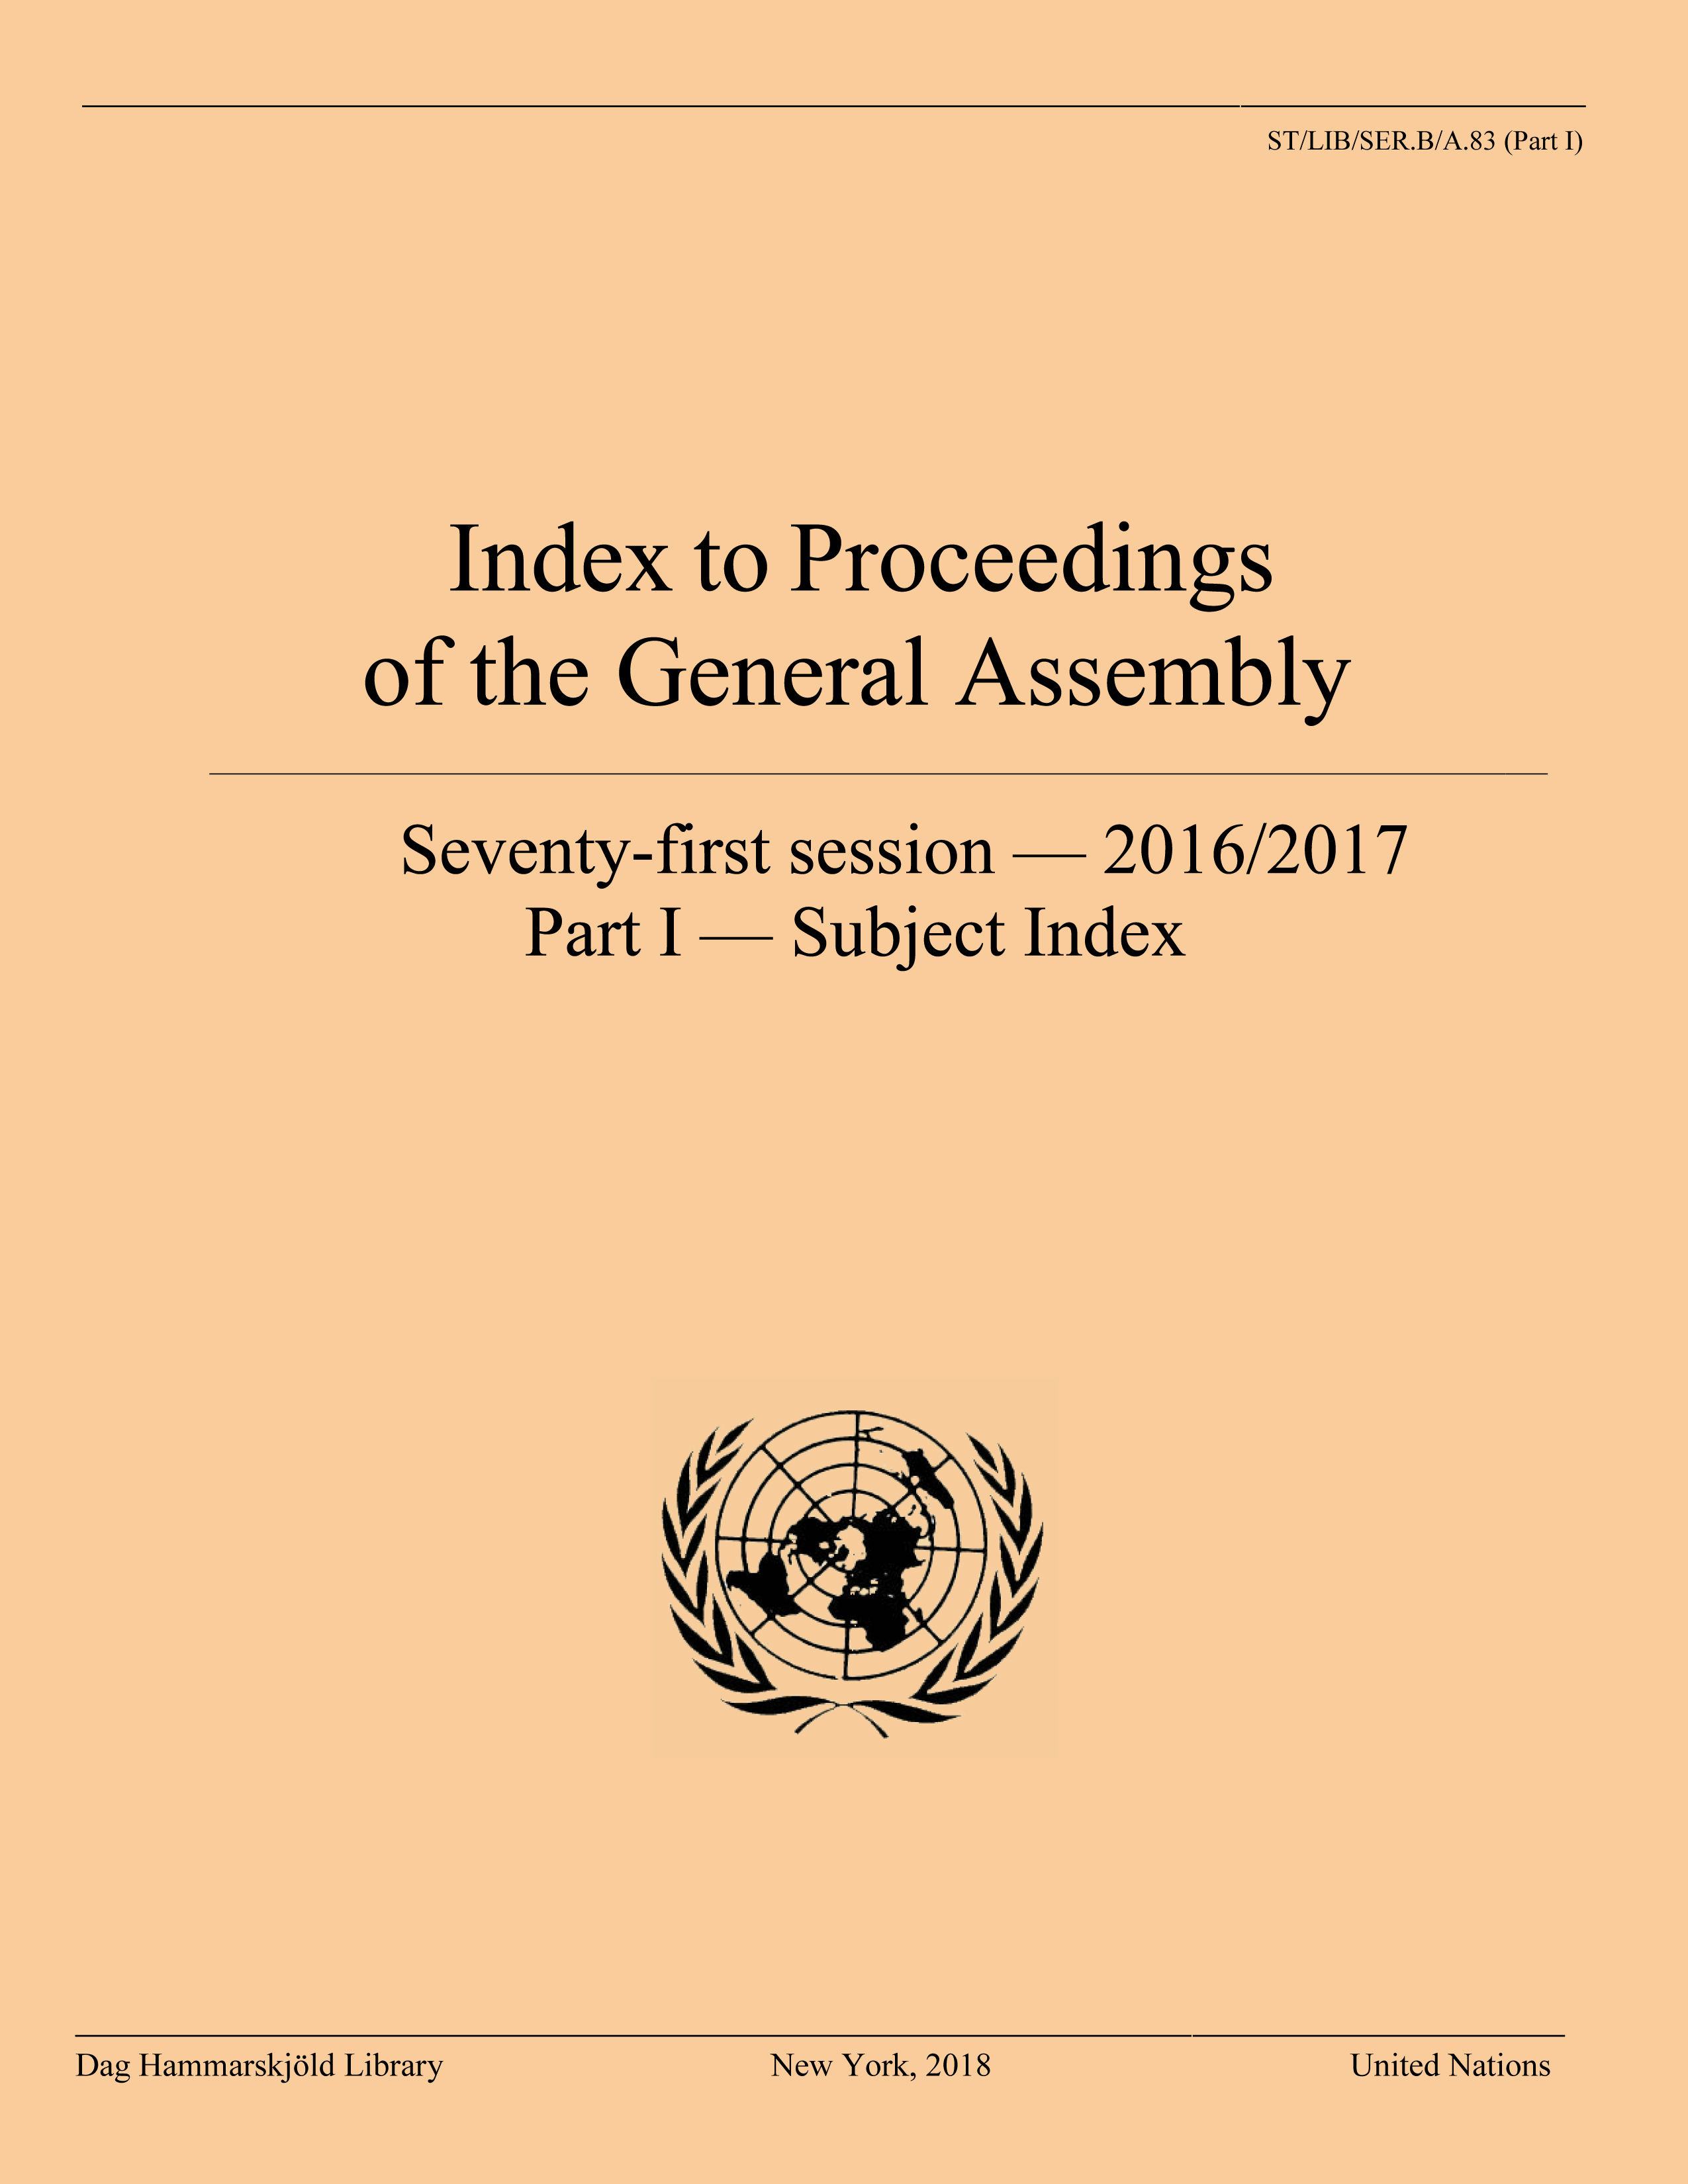 image of Index to Proceedings of the General Assembly 2016/2017